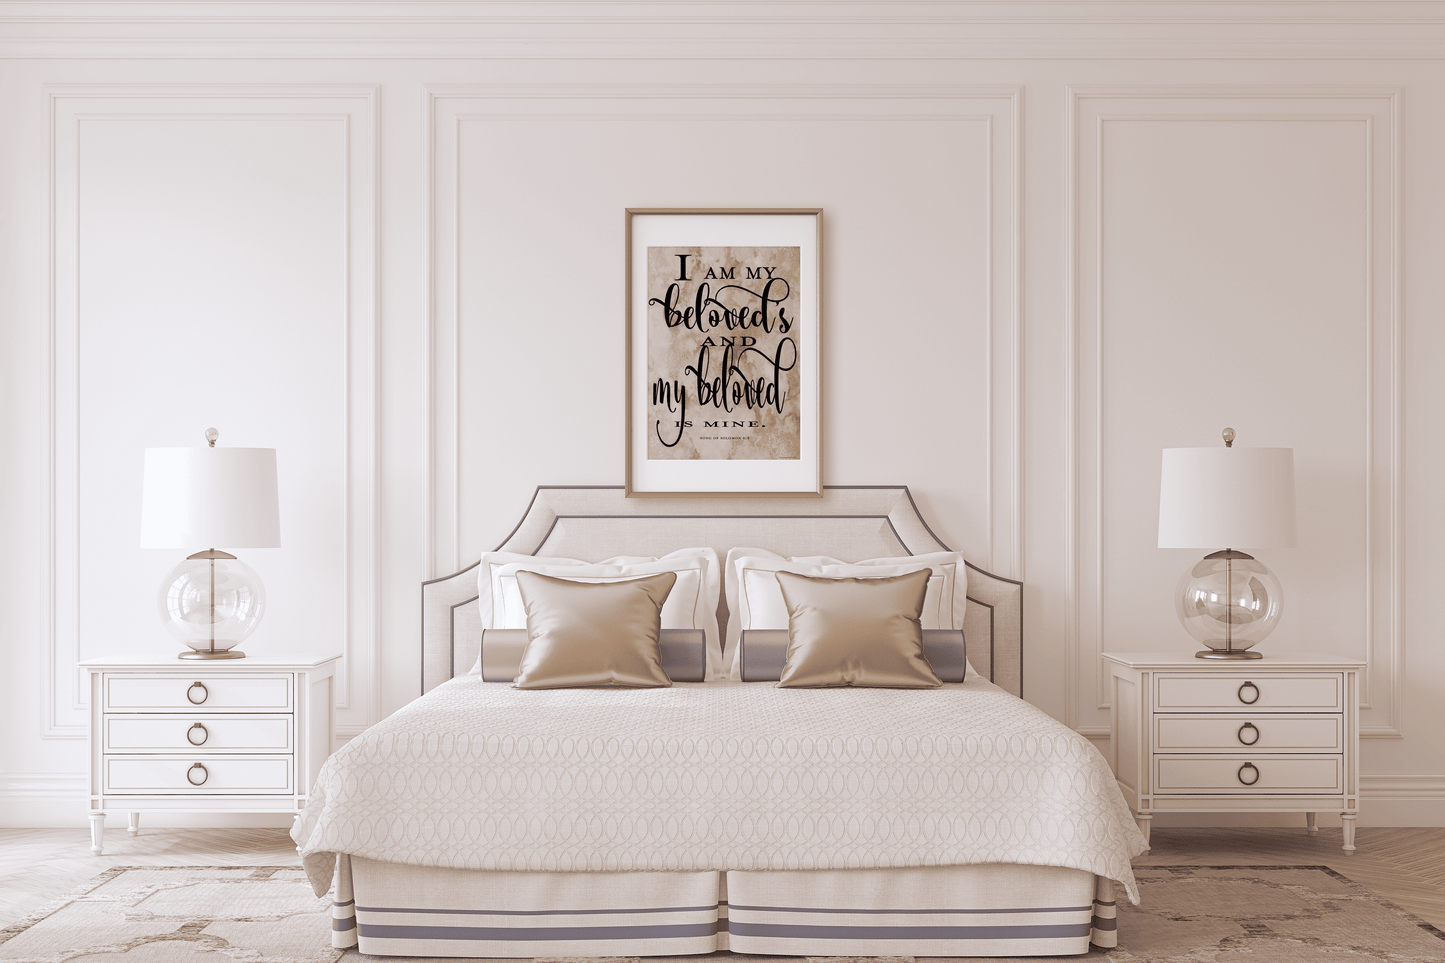 Song of Solomon 6:3 Art Print in elegant gold and white bedroom above bed